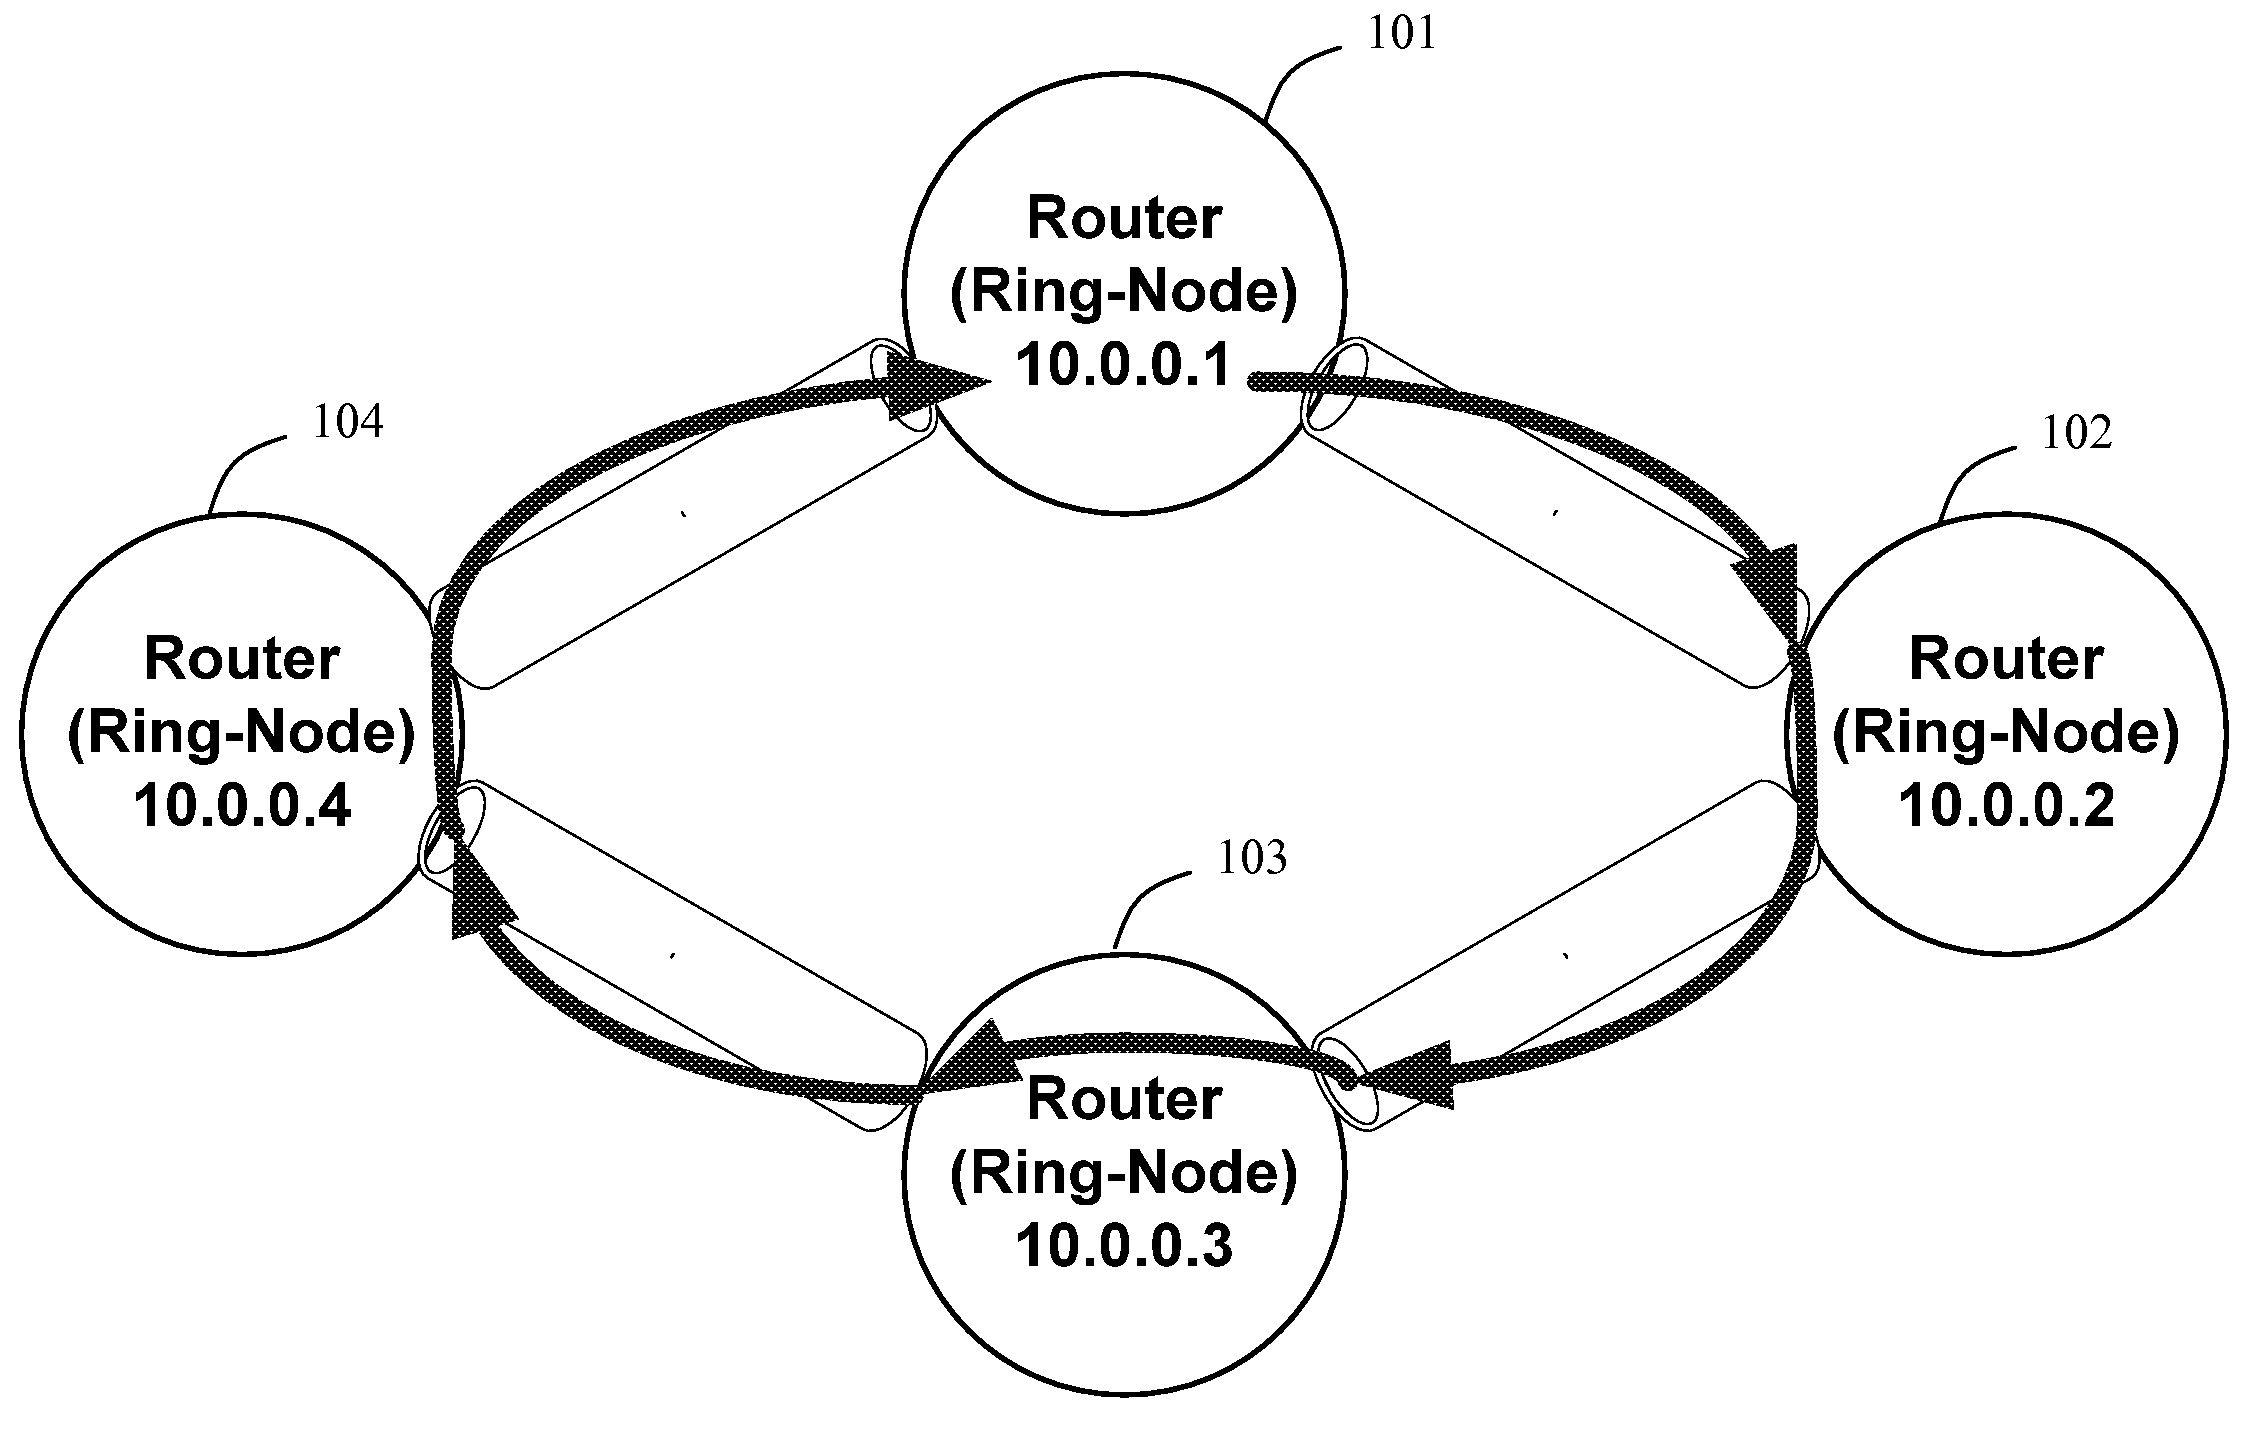 Resilient IP ring protocol and architecture